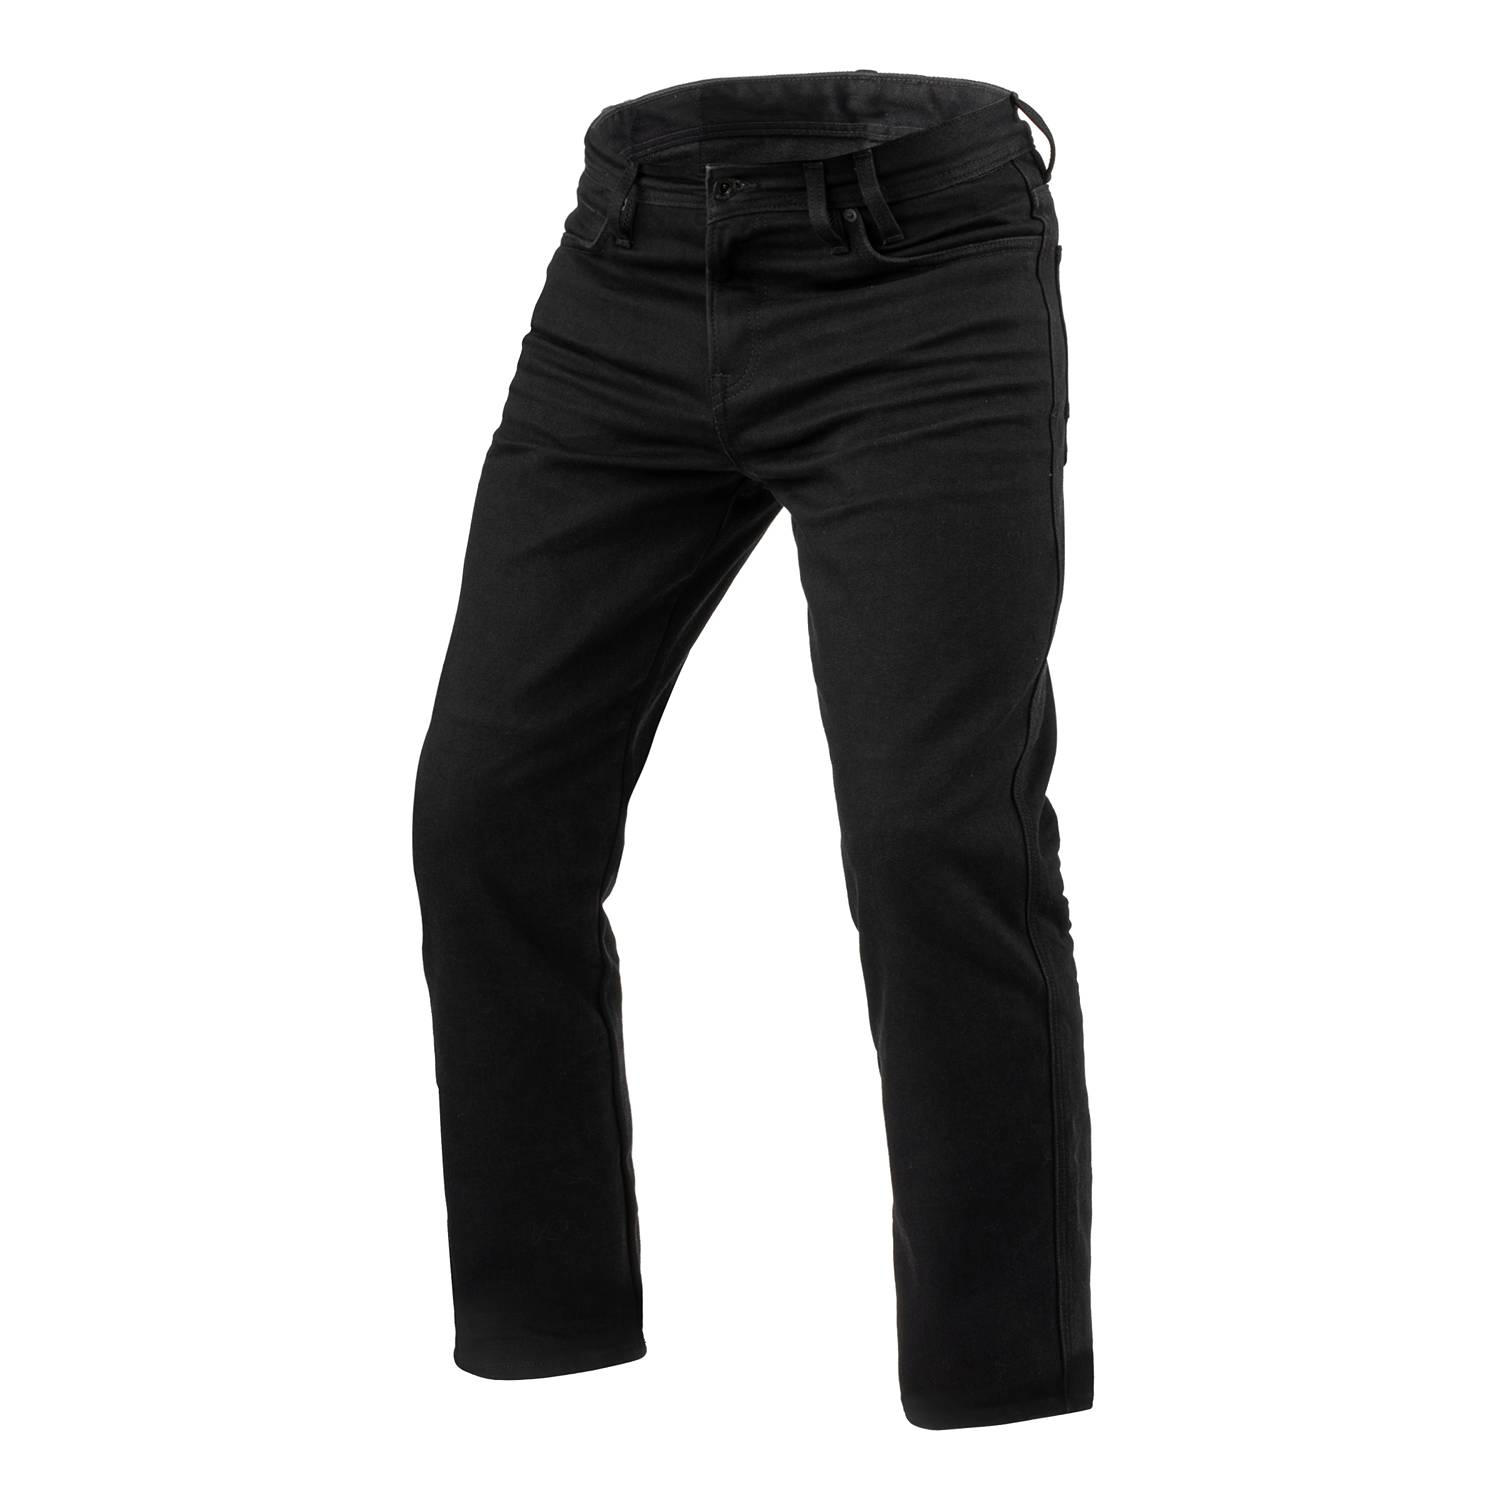 Image of REV'IT! Jeans Lombard 3 RF Black L32 Motorcycle Jeans Size L32/W33 ID 8700001375832